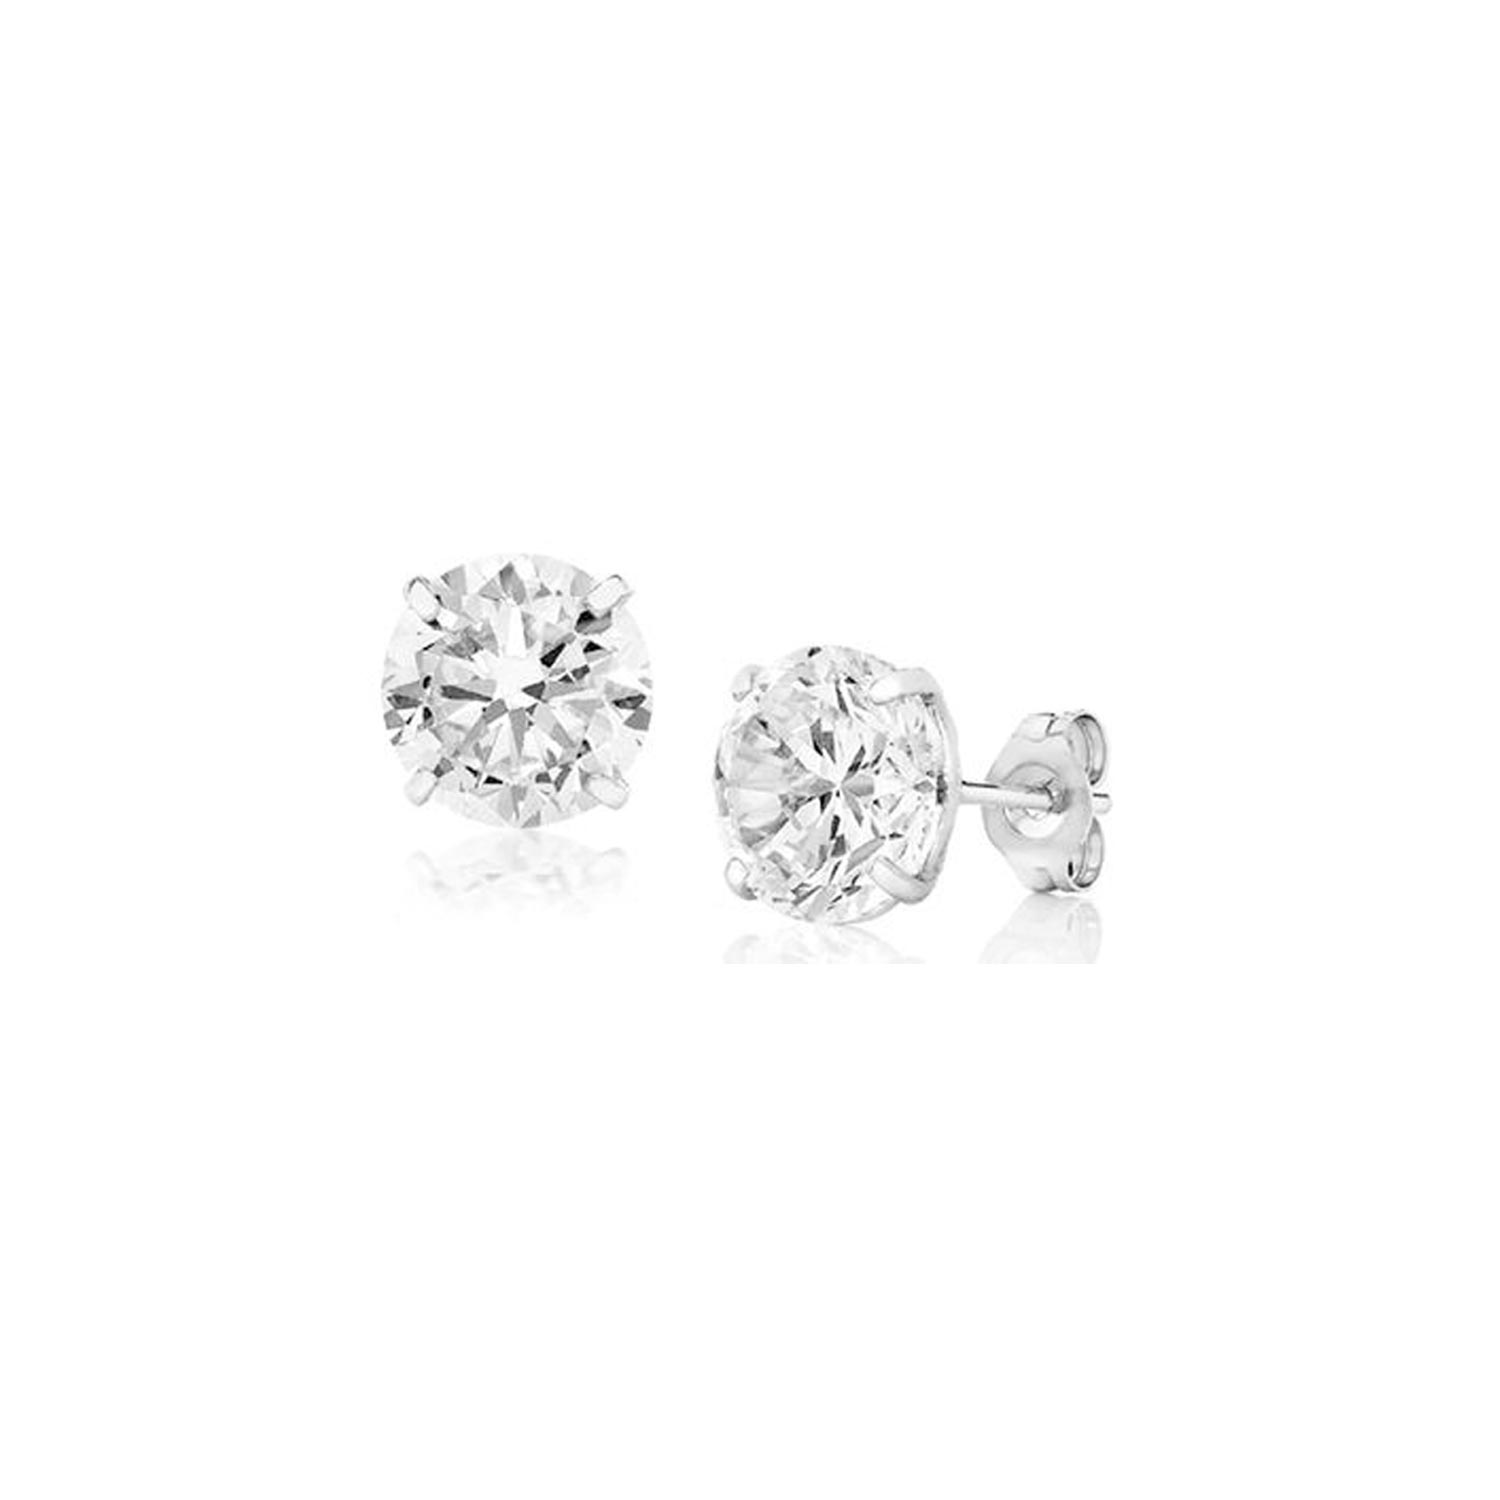 14K White Gold Stud Earrings Made with Swarovski Elements